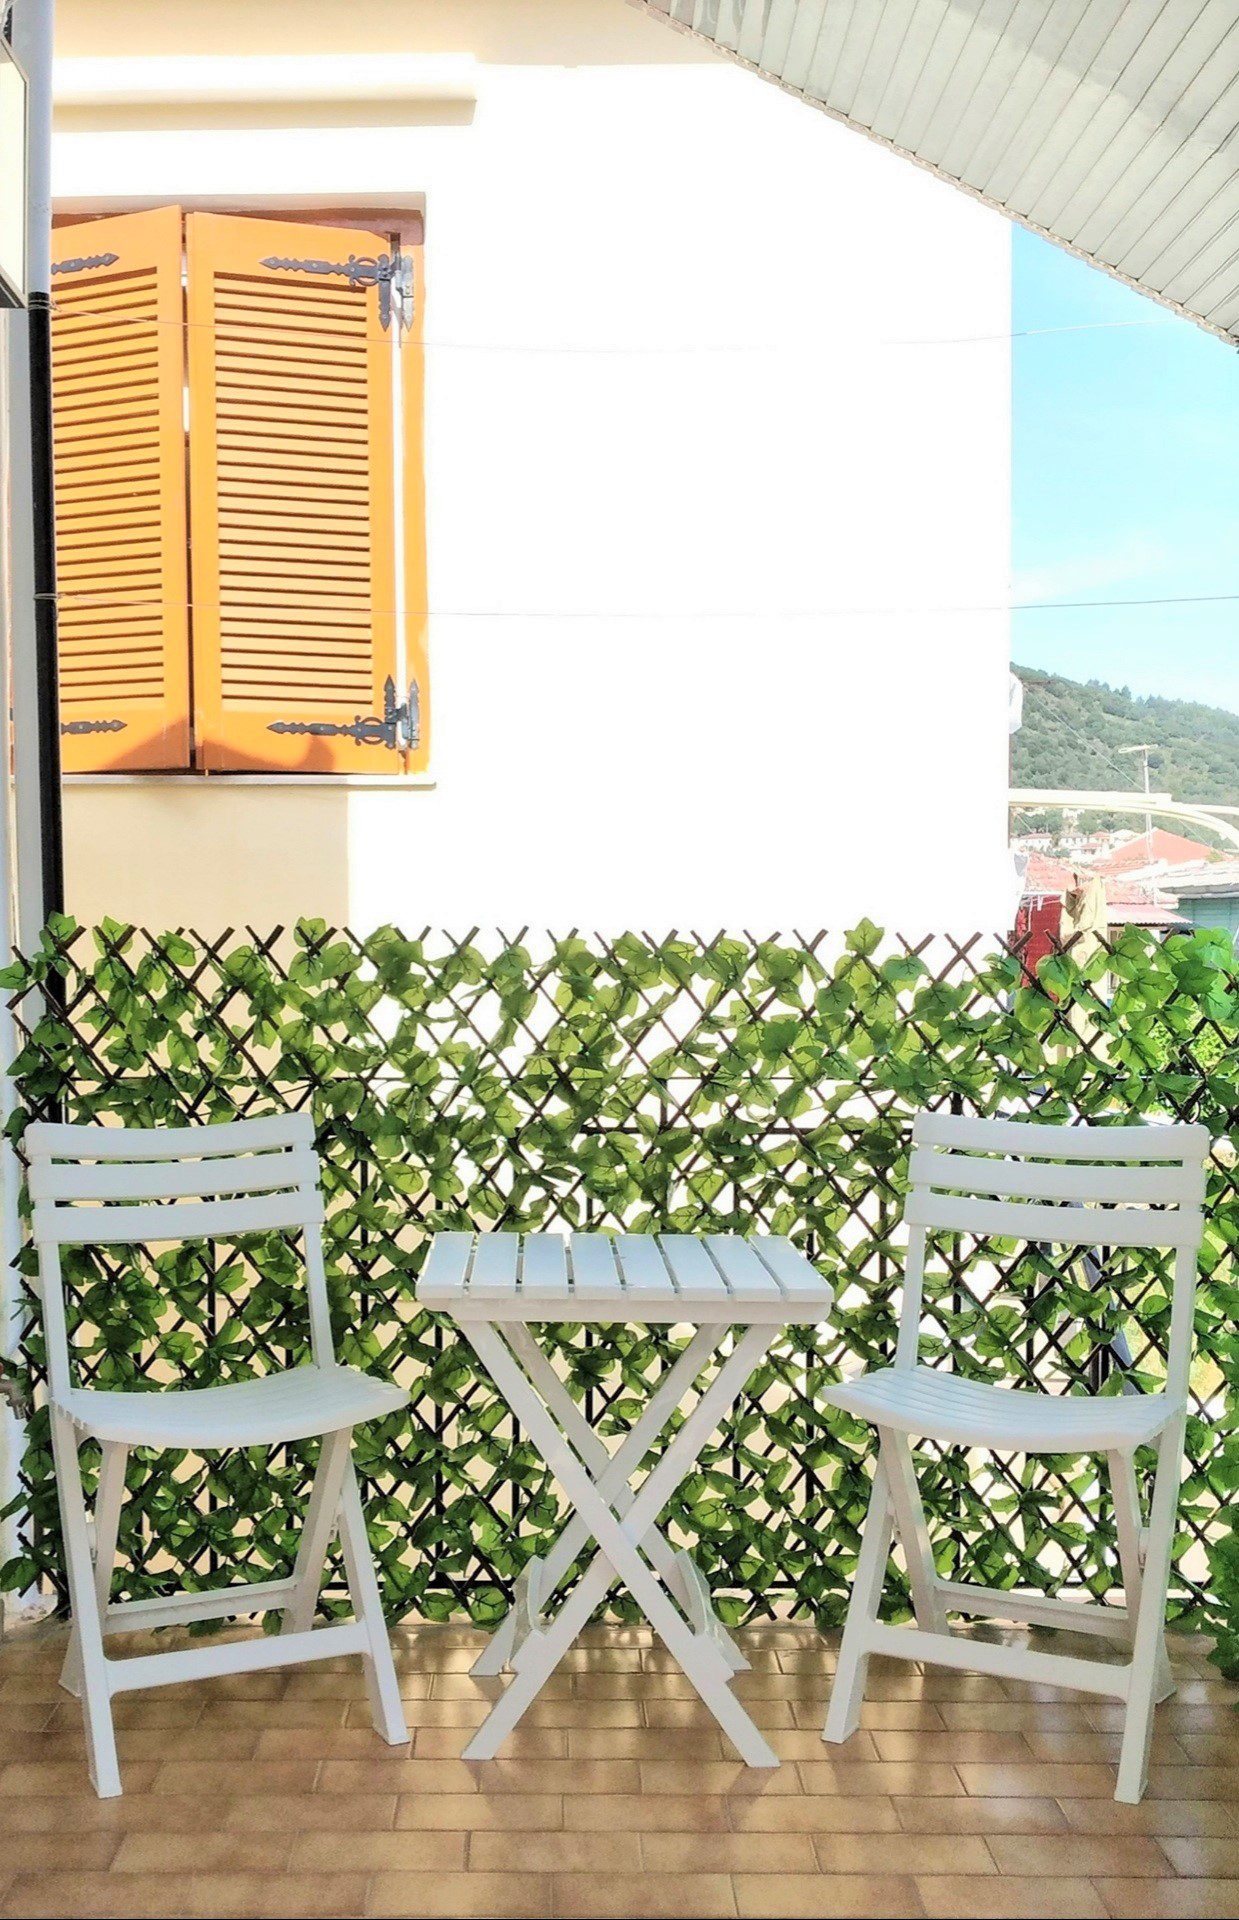 Apartment to rent in Ithaca Greece, Vathi